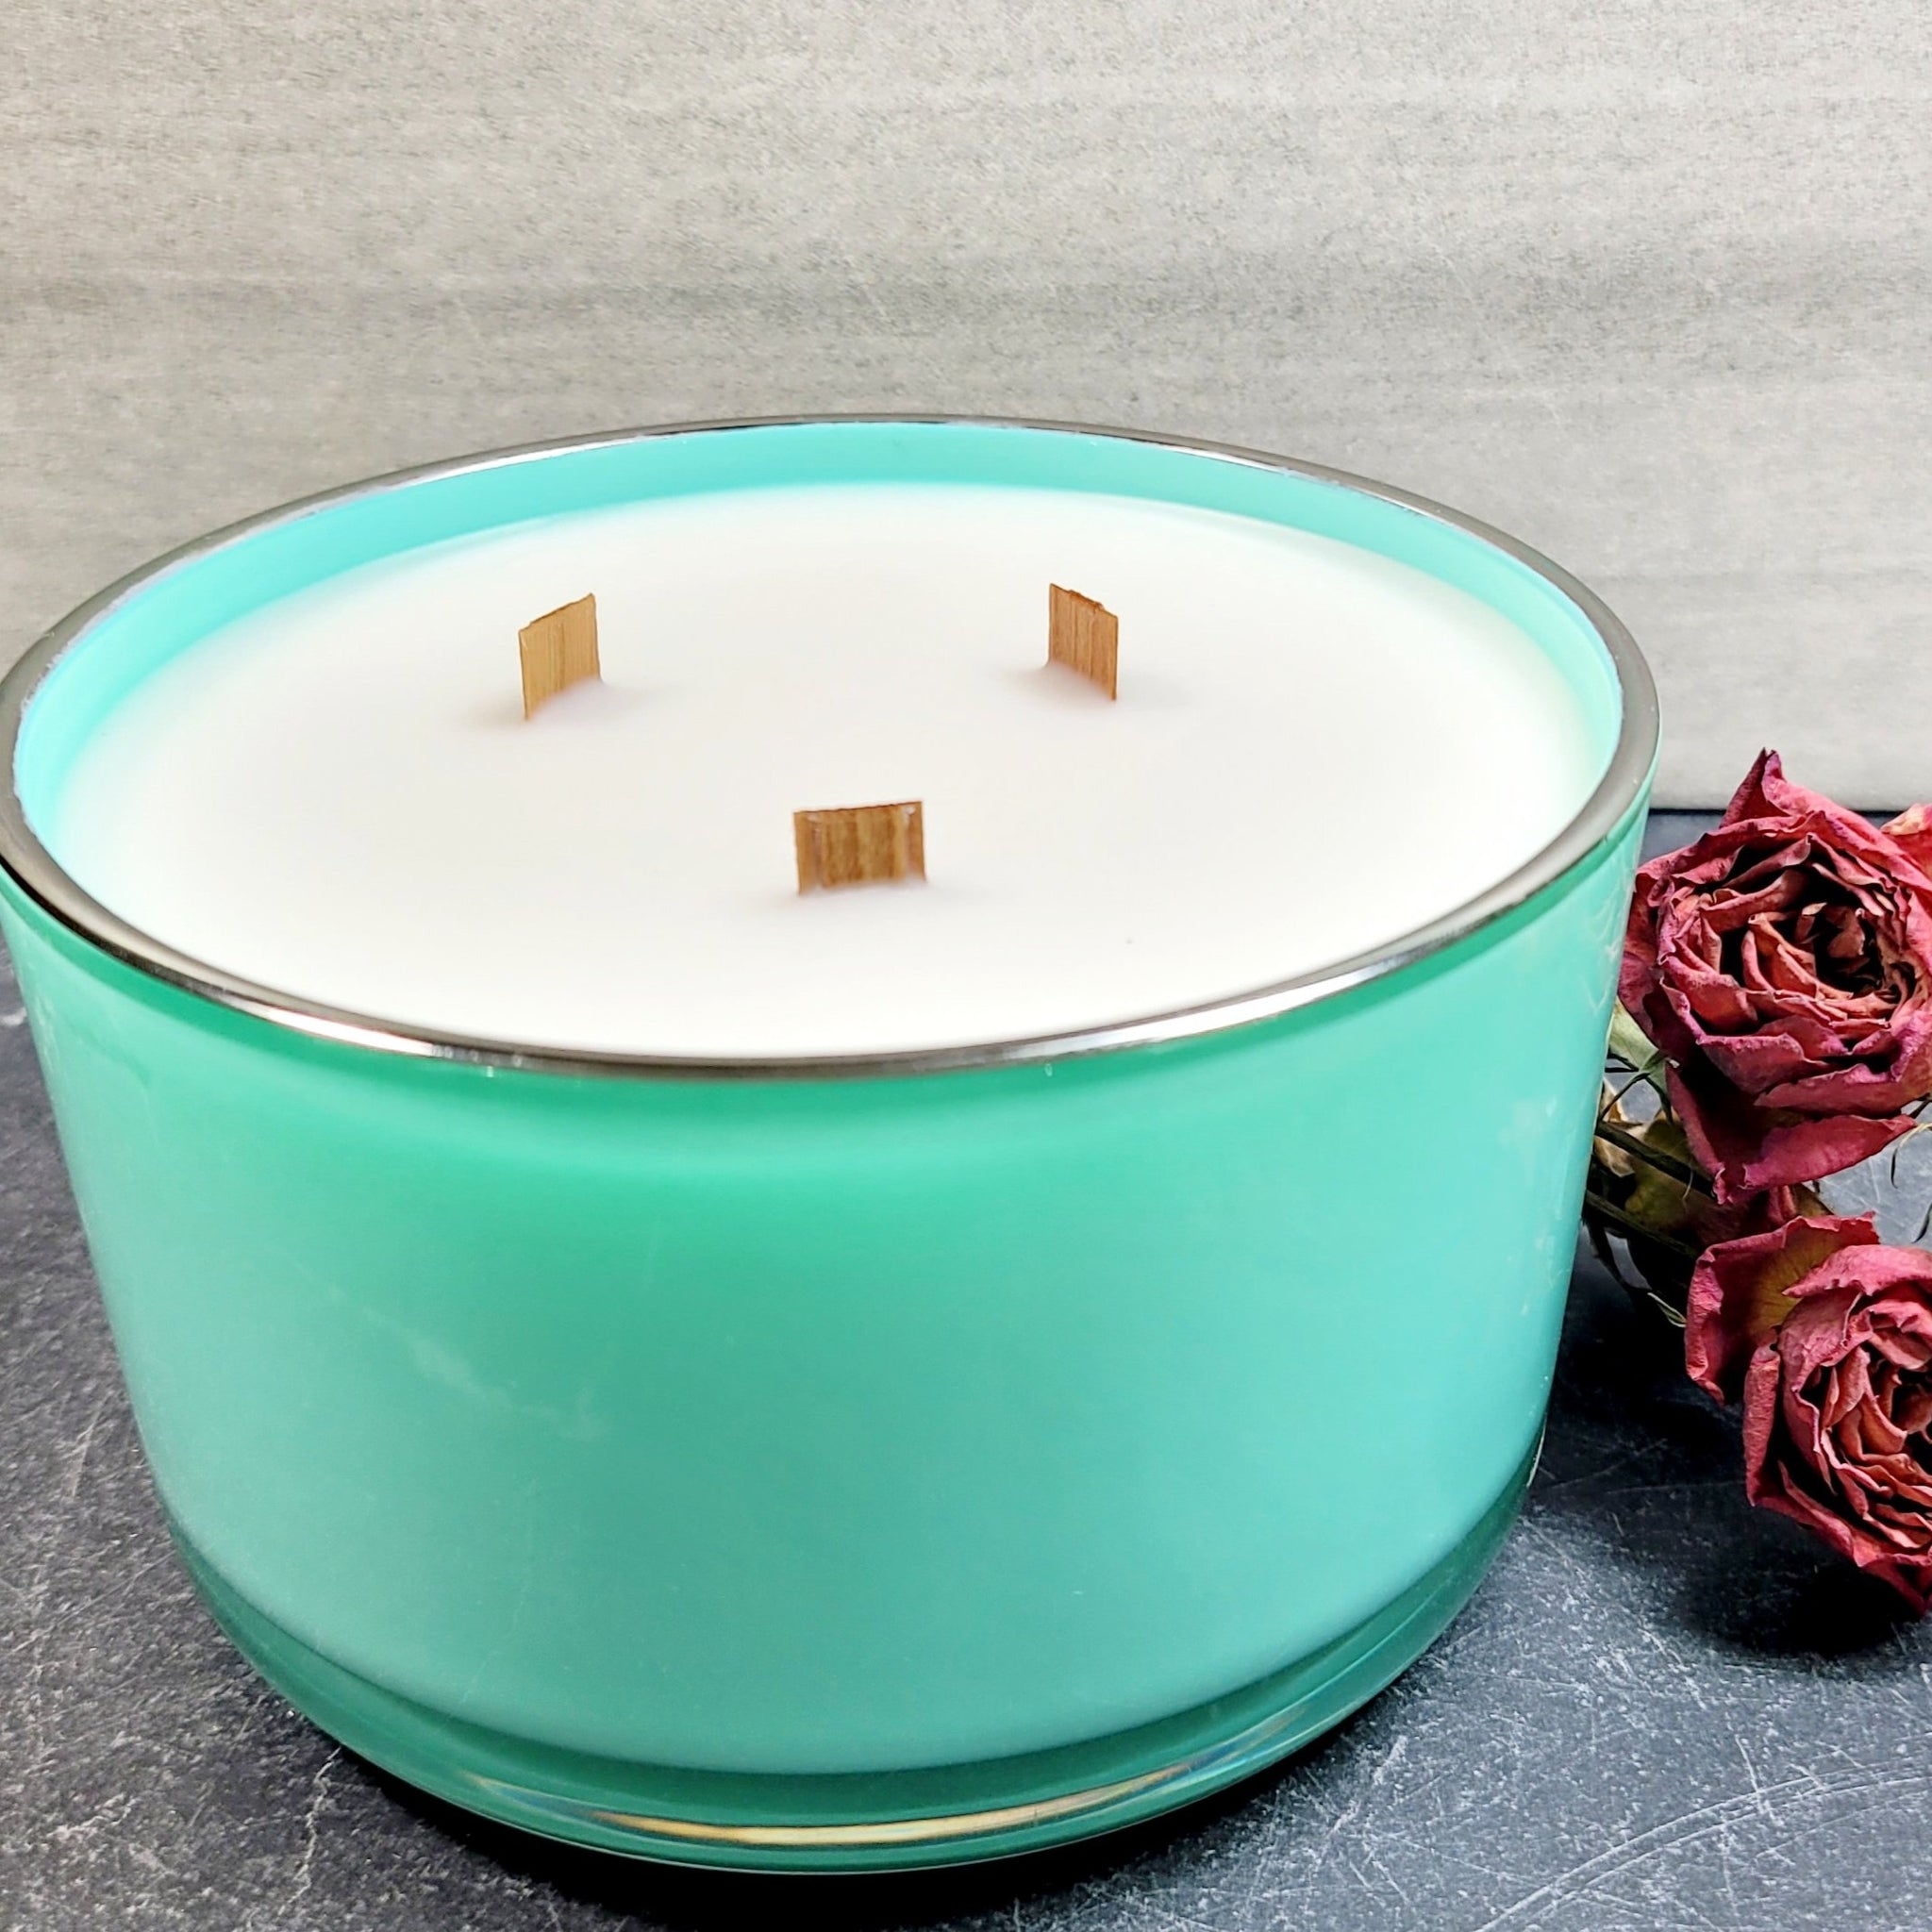 Forevermore Bowl in Tiffany Blue